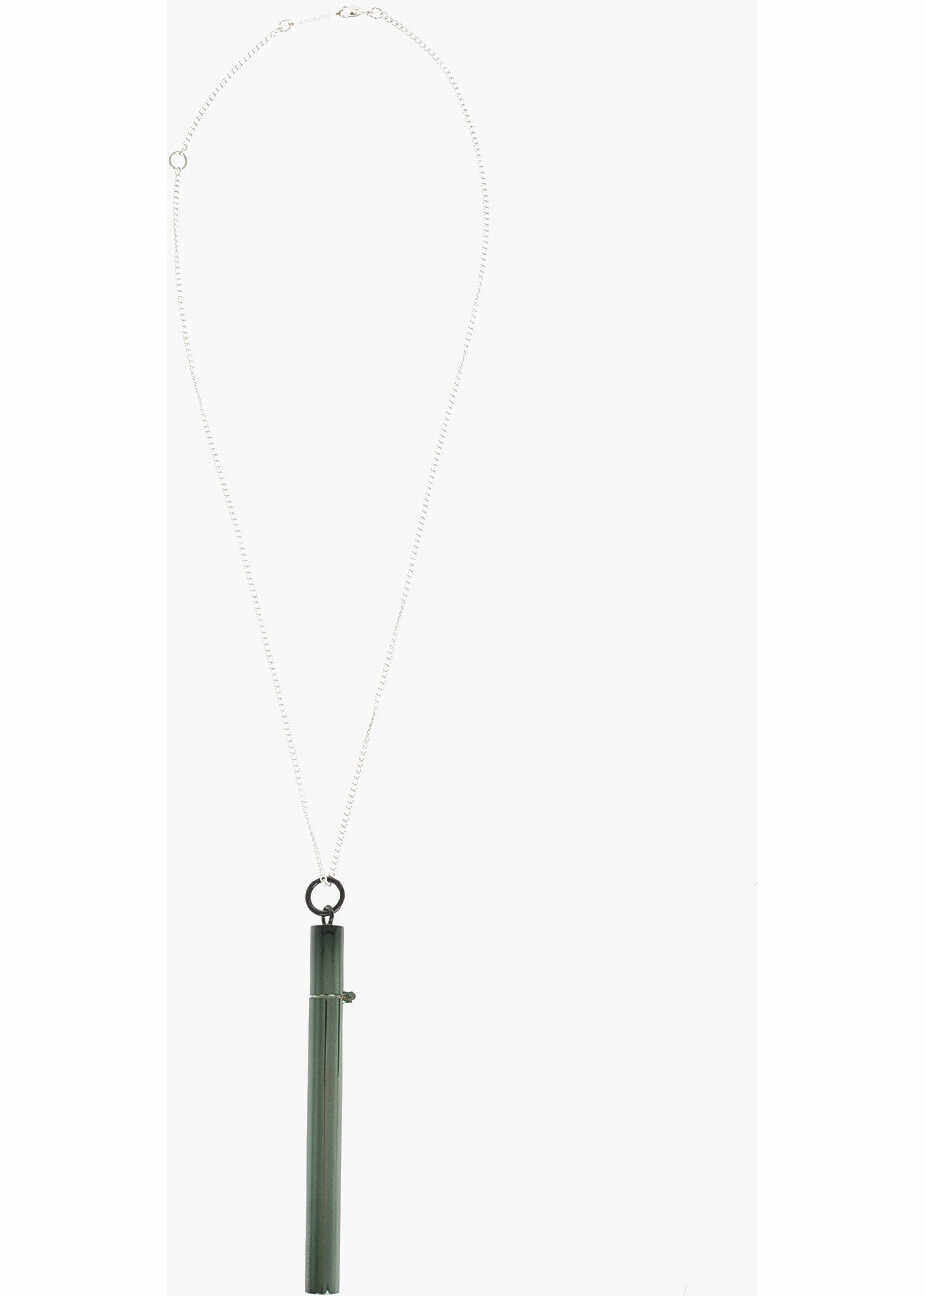 AMBUSH Silver Sss Cig Case Necklace With Cylinder-Shaped Pendant Green